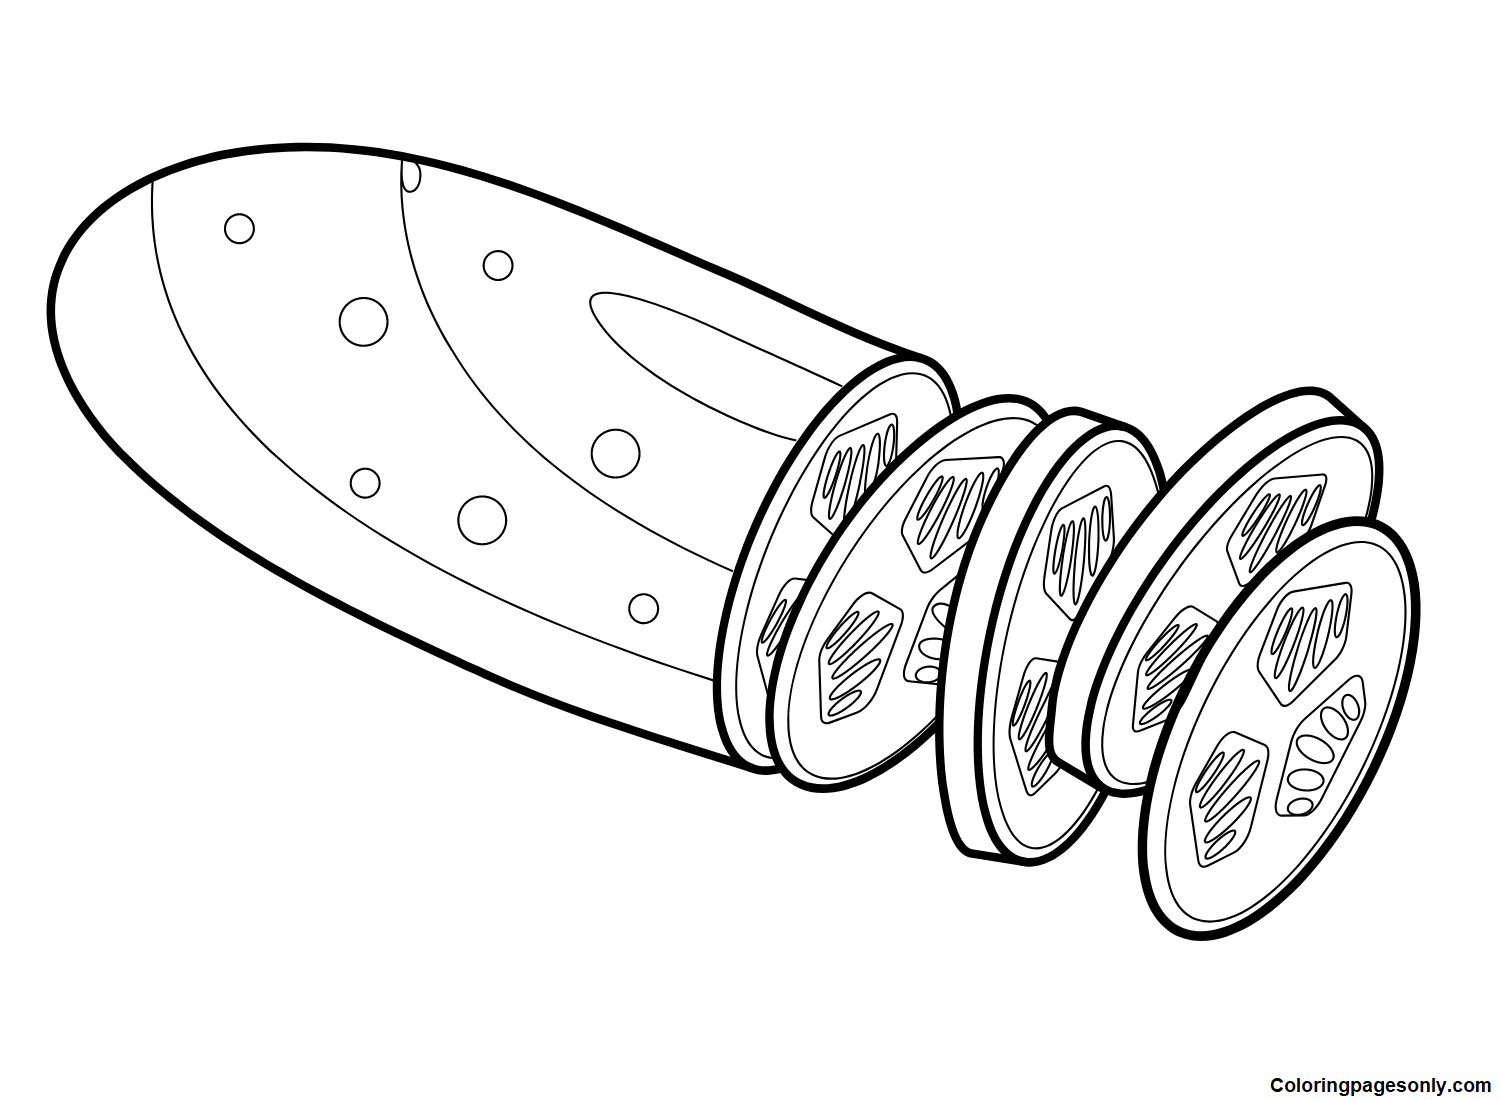 Free Cucumber Coloring Page